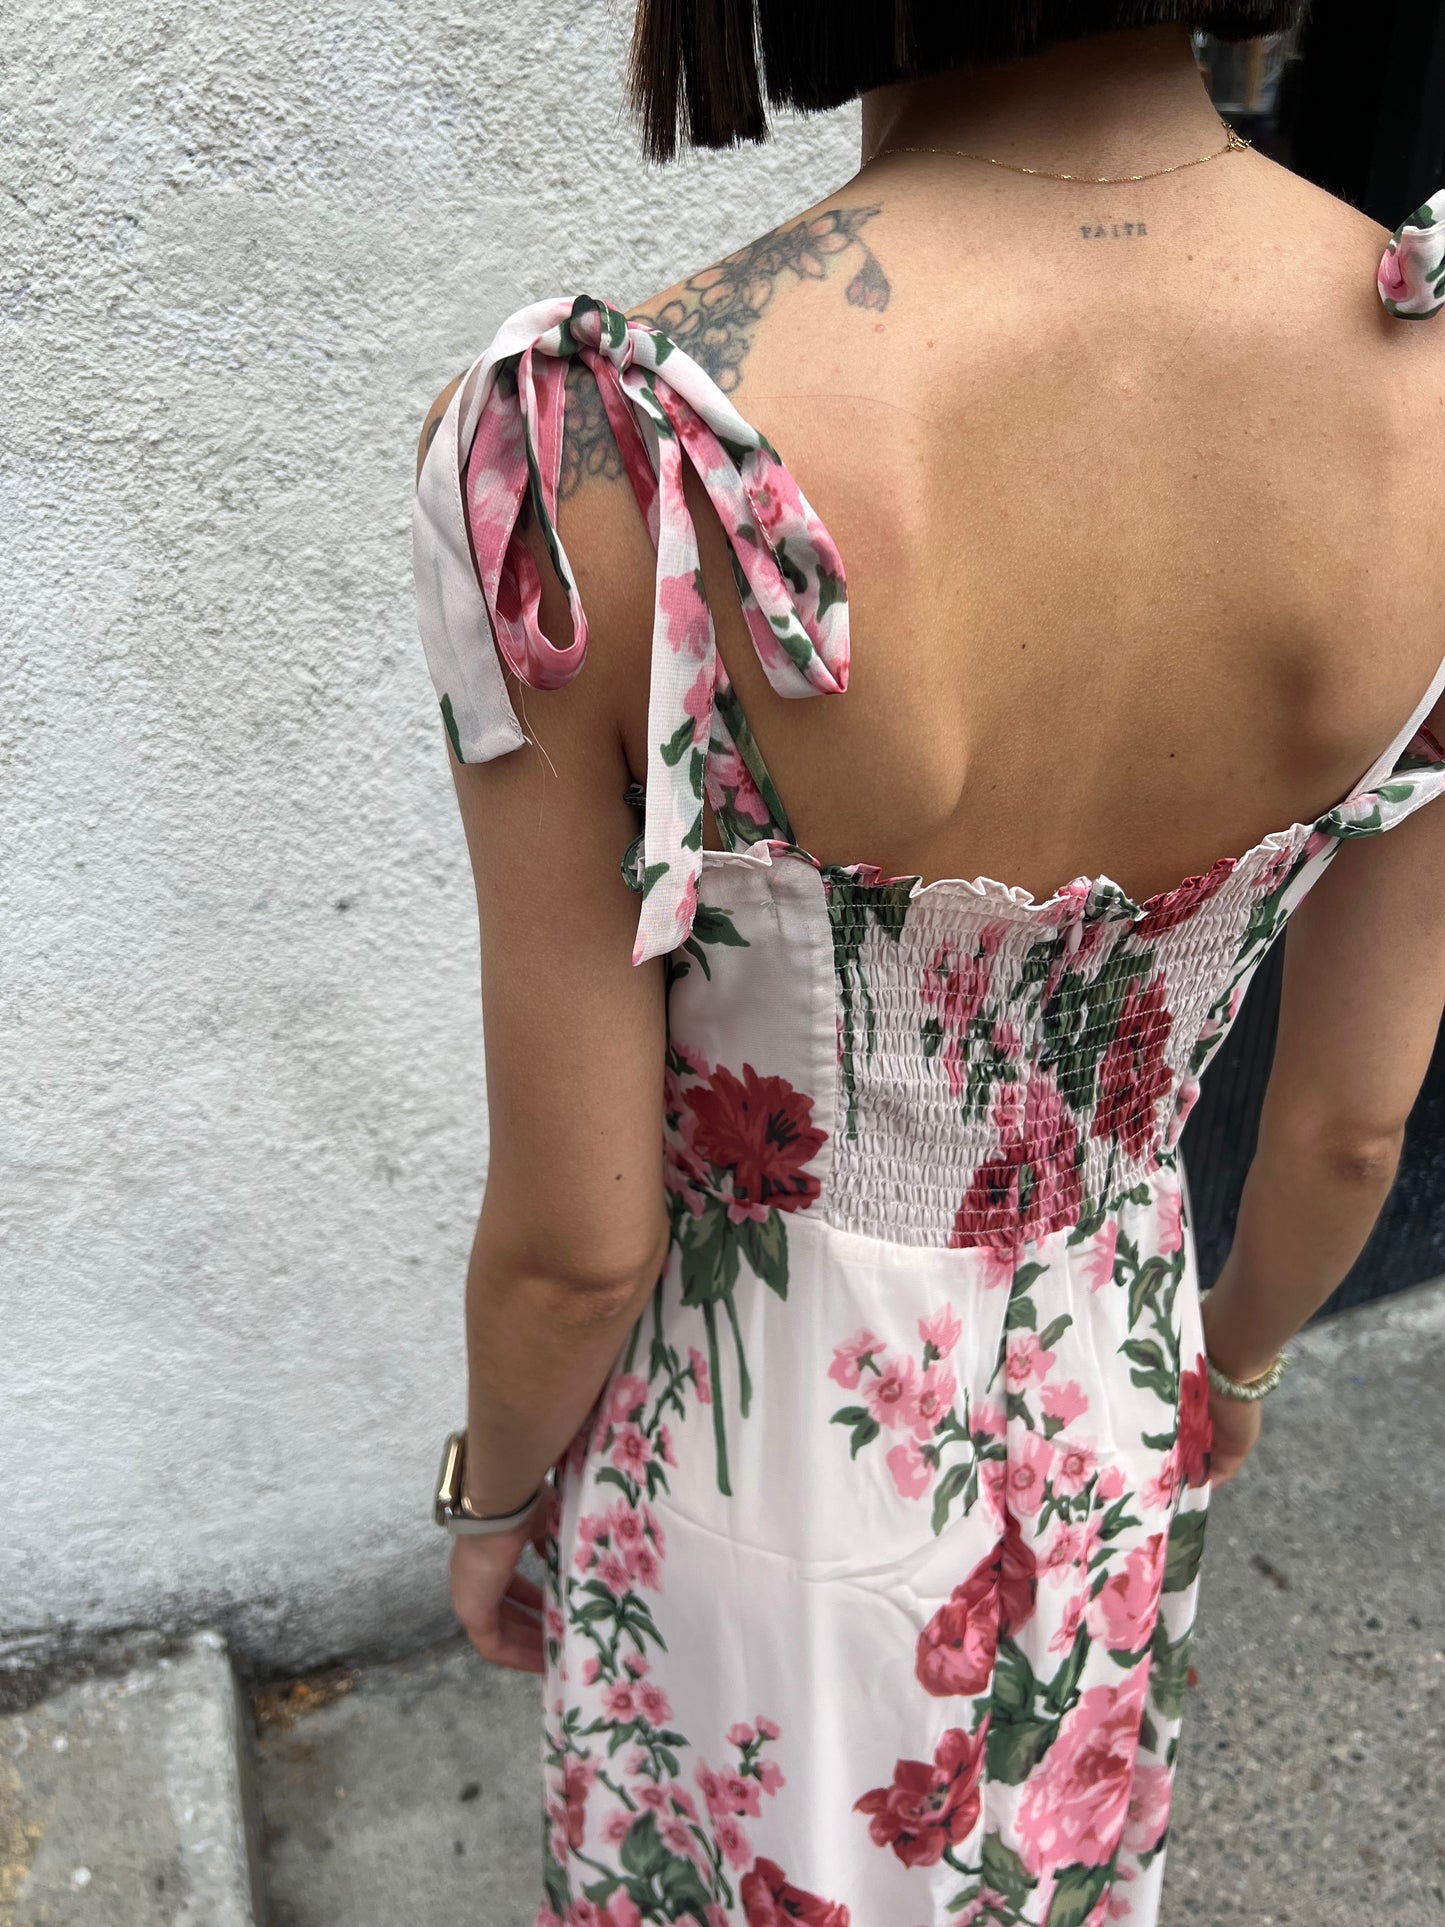 long floral fitted dress